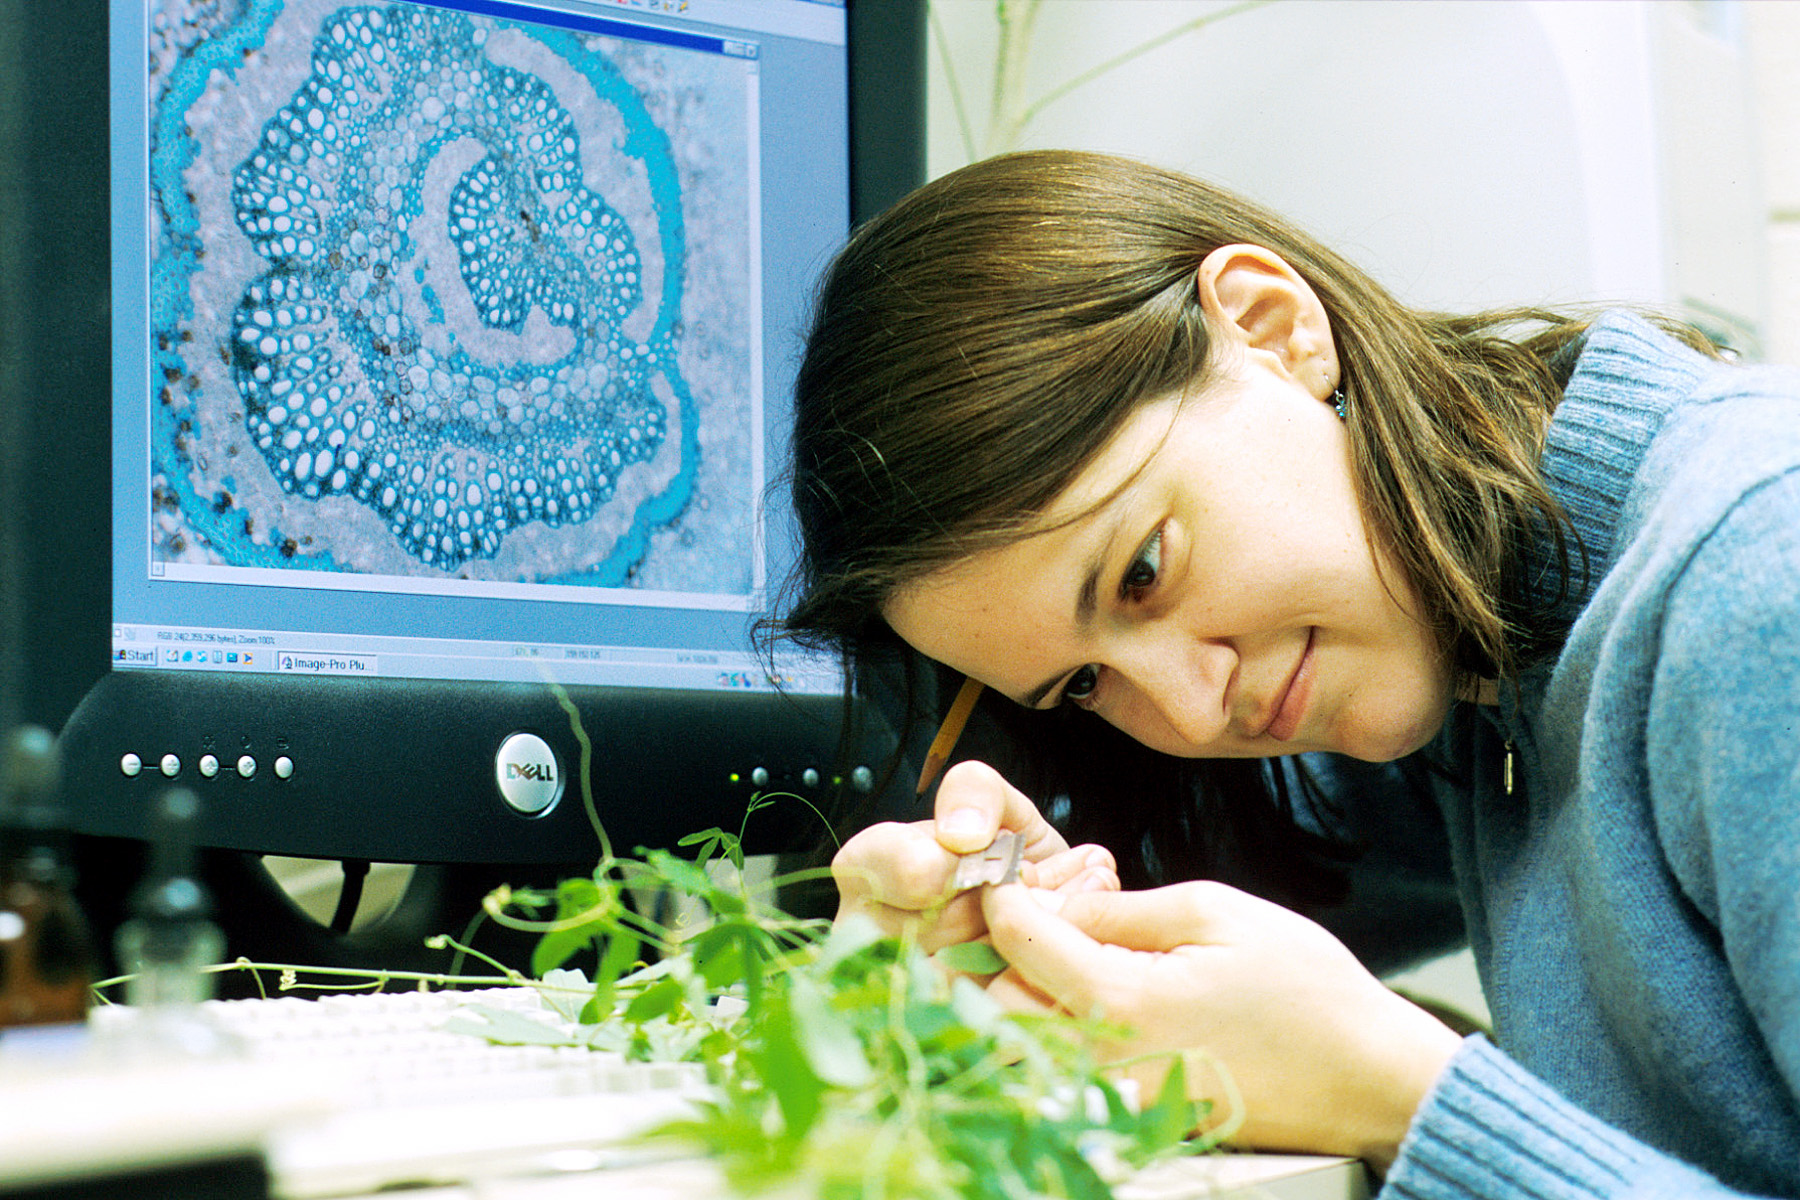 University of Utah biologist Kate McCulloh used a razor blade to slice thousands of leaves and stems so she could learn how water is transported through conduits in plants. The microcope image on the computer screen behind her shows a cross section of a leaf stalk, with the conduits appearing as white spots.